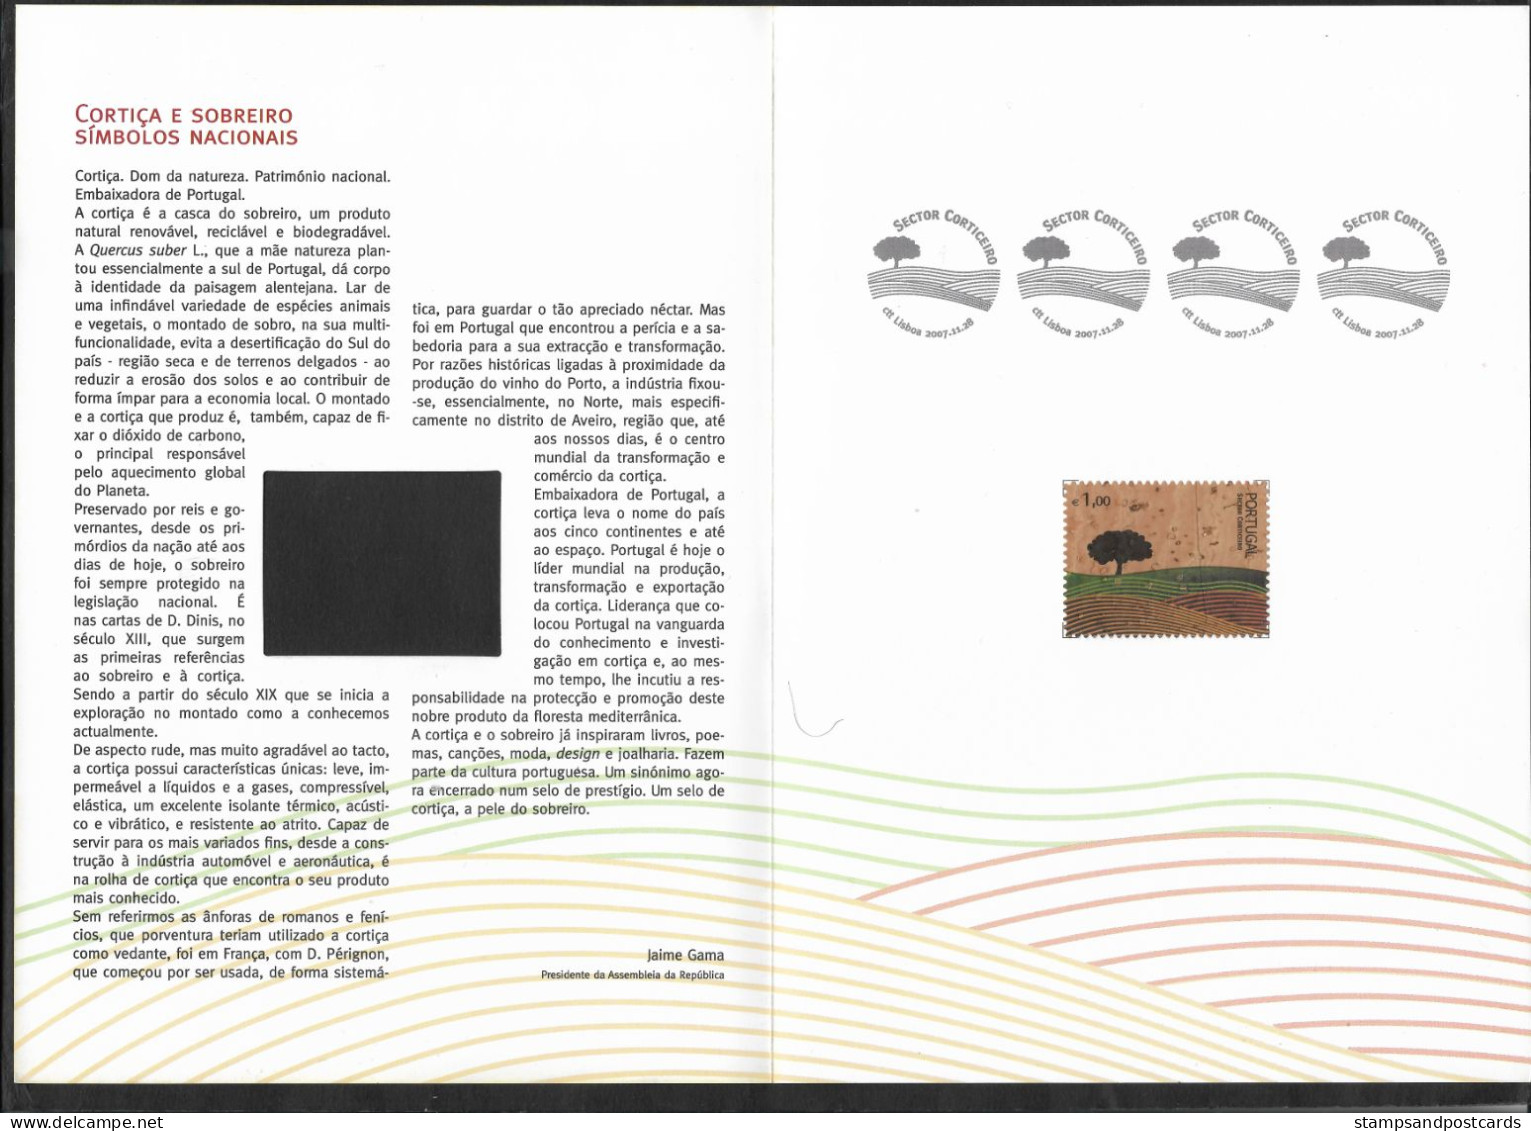 Portugal Premiere Timbre Fait De LIÈGE Arbre 2007 Brochure + Timbre First Ever Stamp Made Of CORK Tree Brochure + Stamp - Covers & Documents